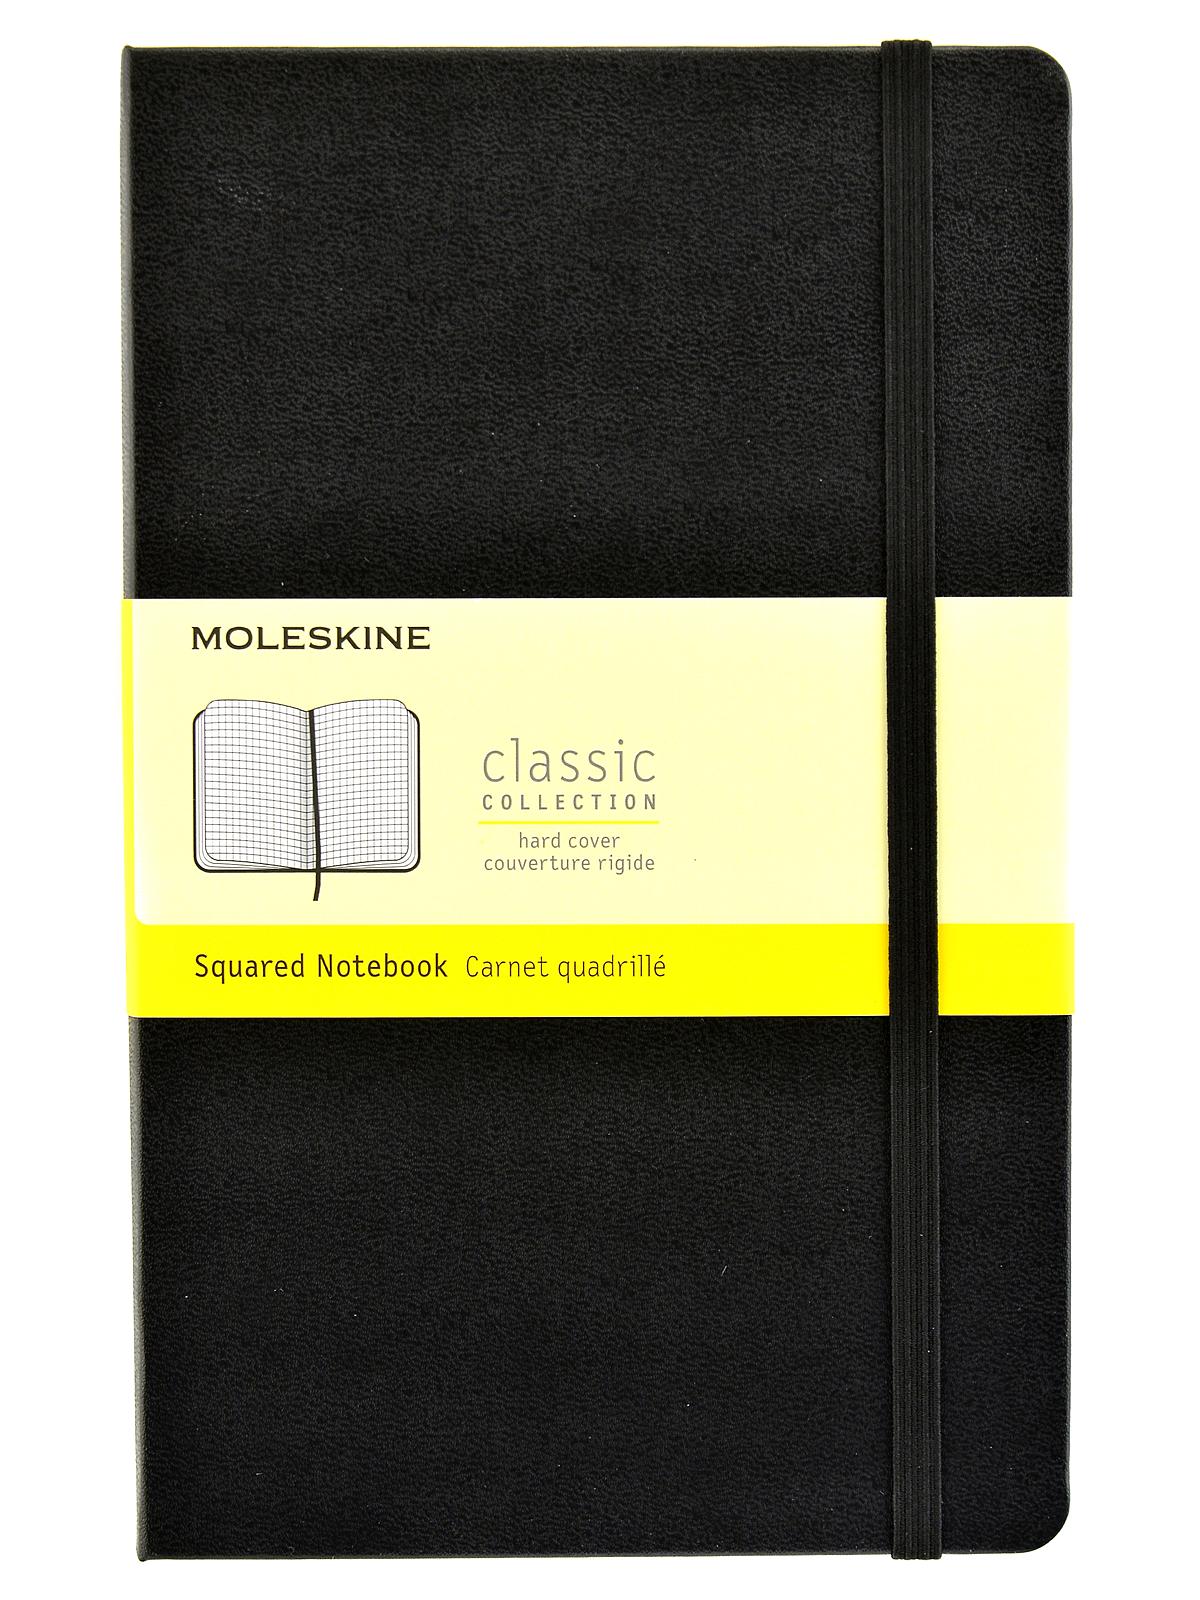 Classic Hard Cover Notebooks Black 5 In. X 8 1 4 In. 240 Pages, Squared